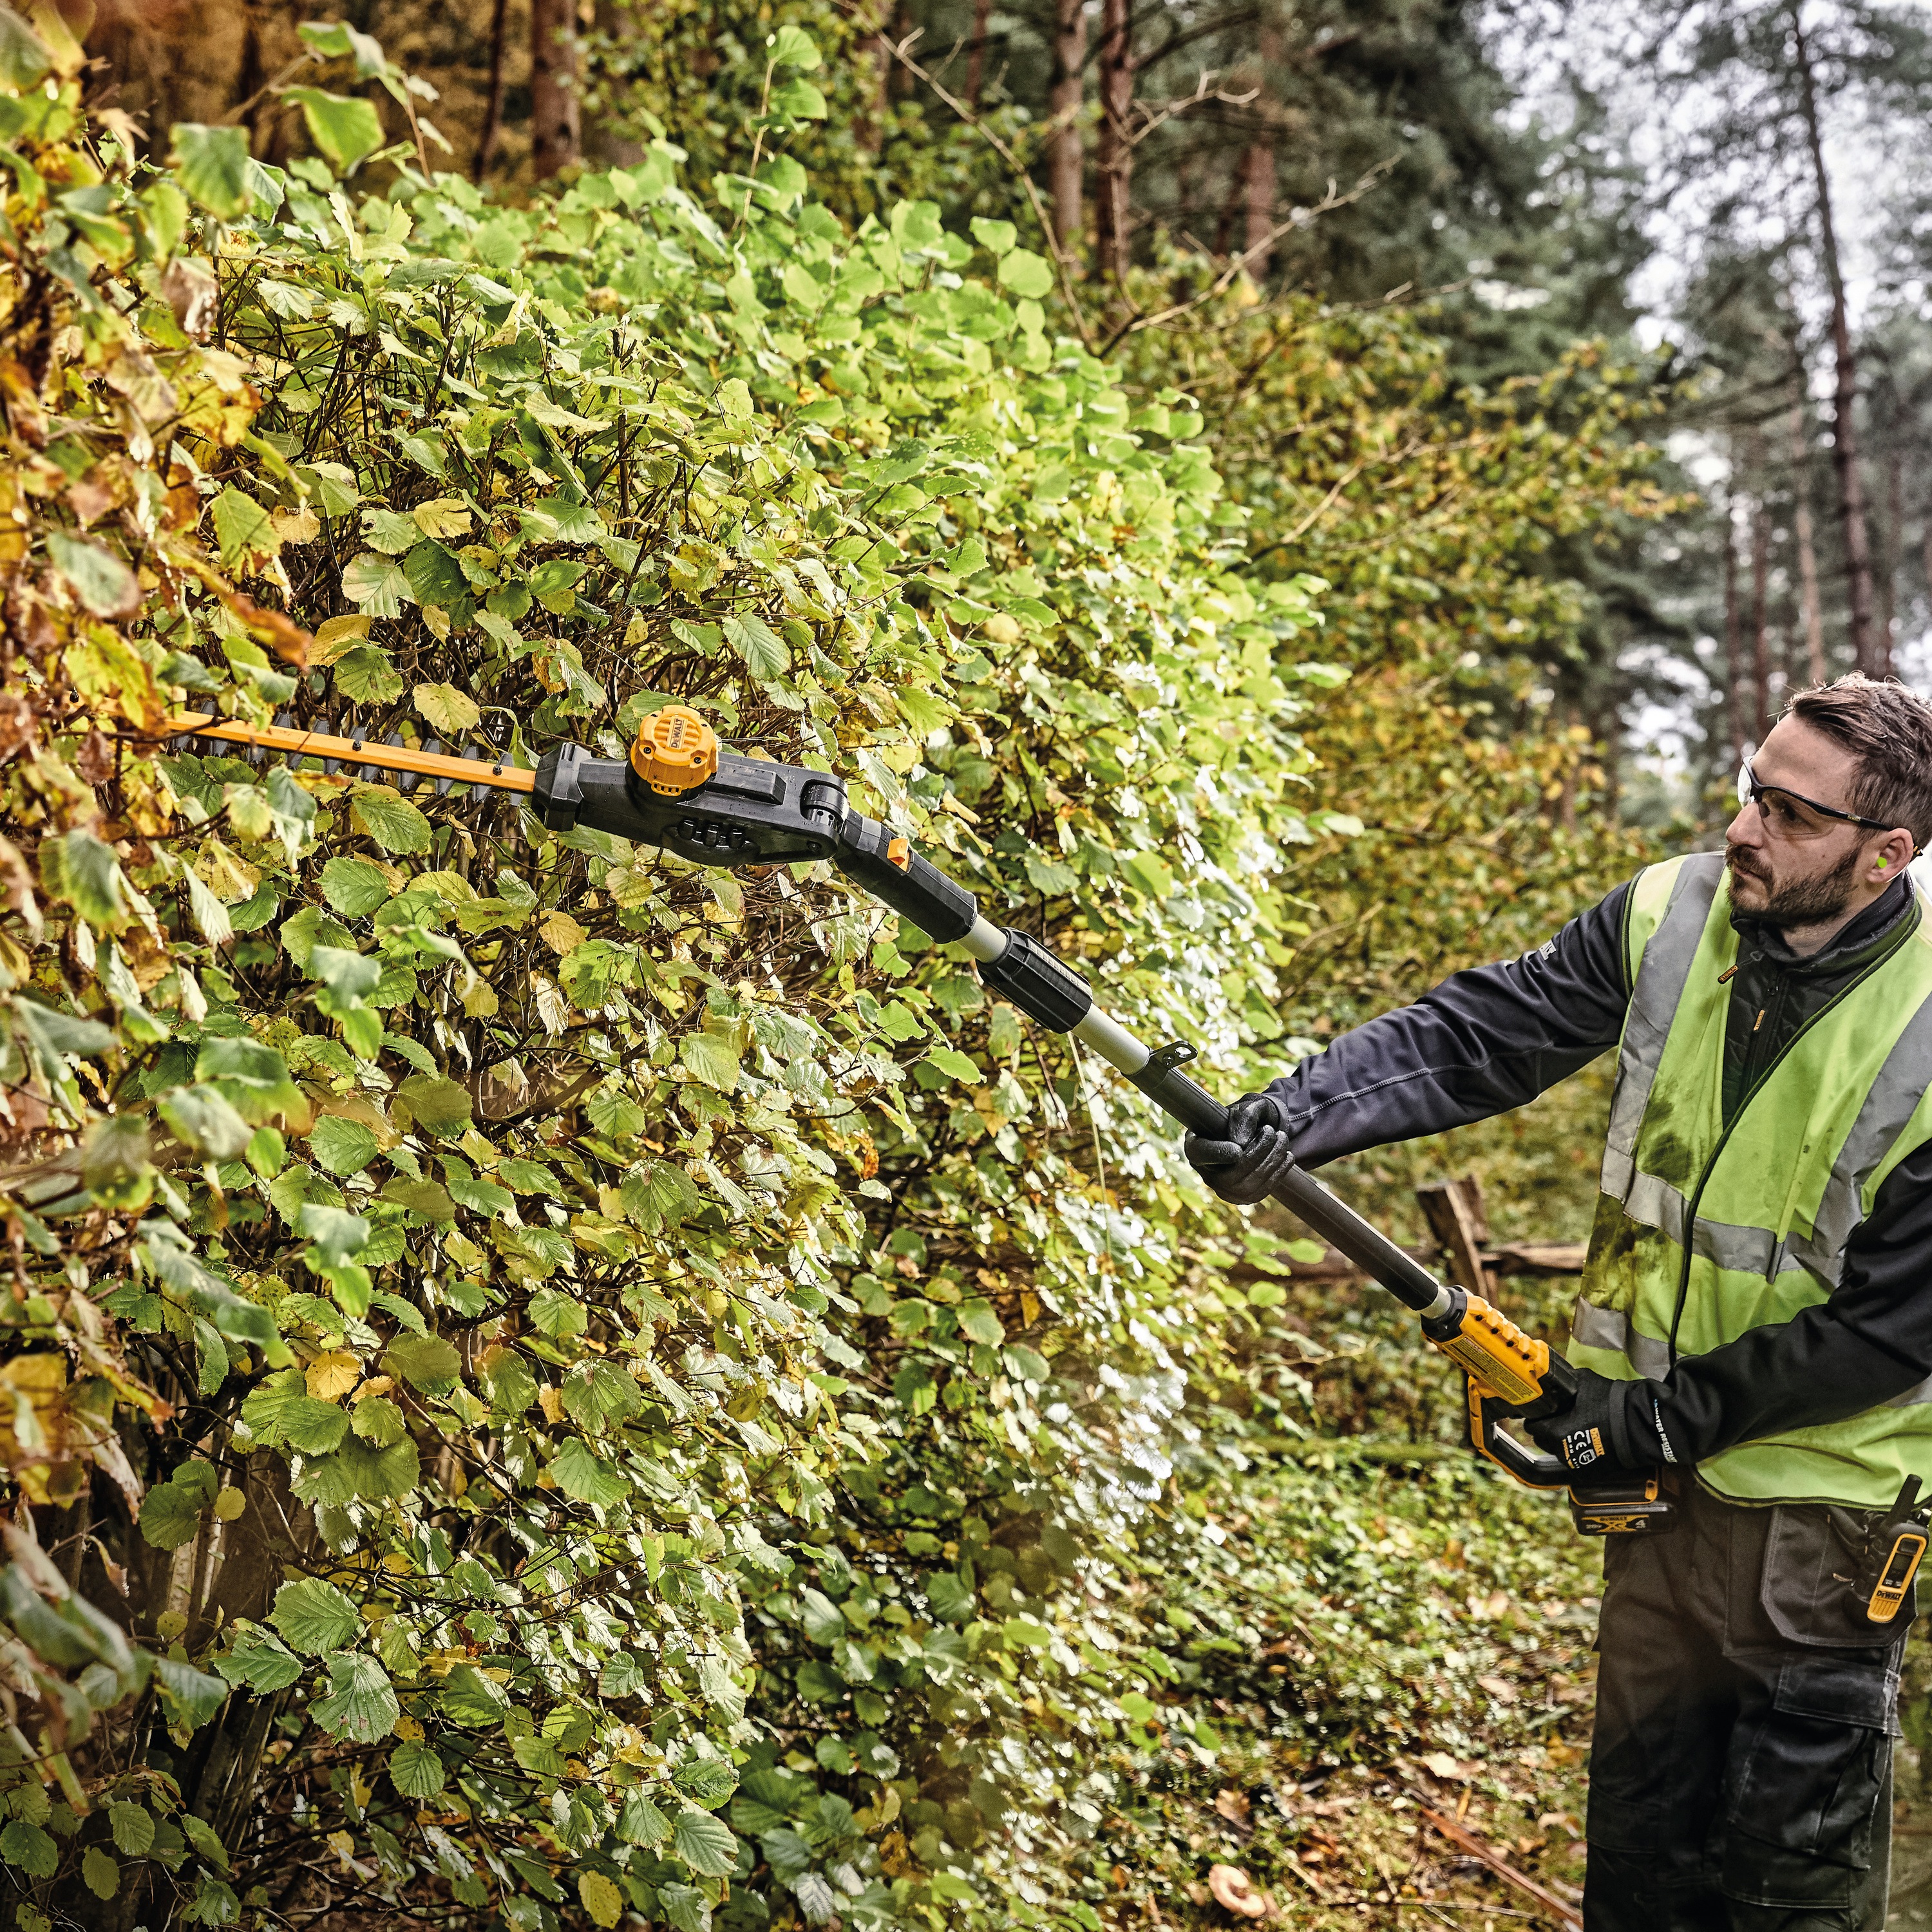 Pole Hedge Trimmer being used by a person to cut through landscape outgrowth.